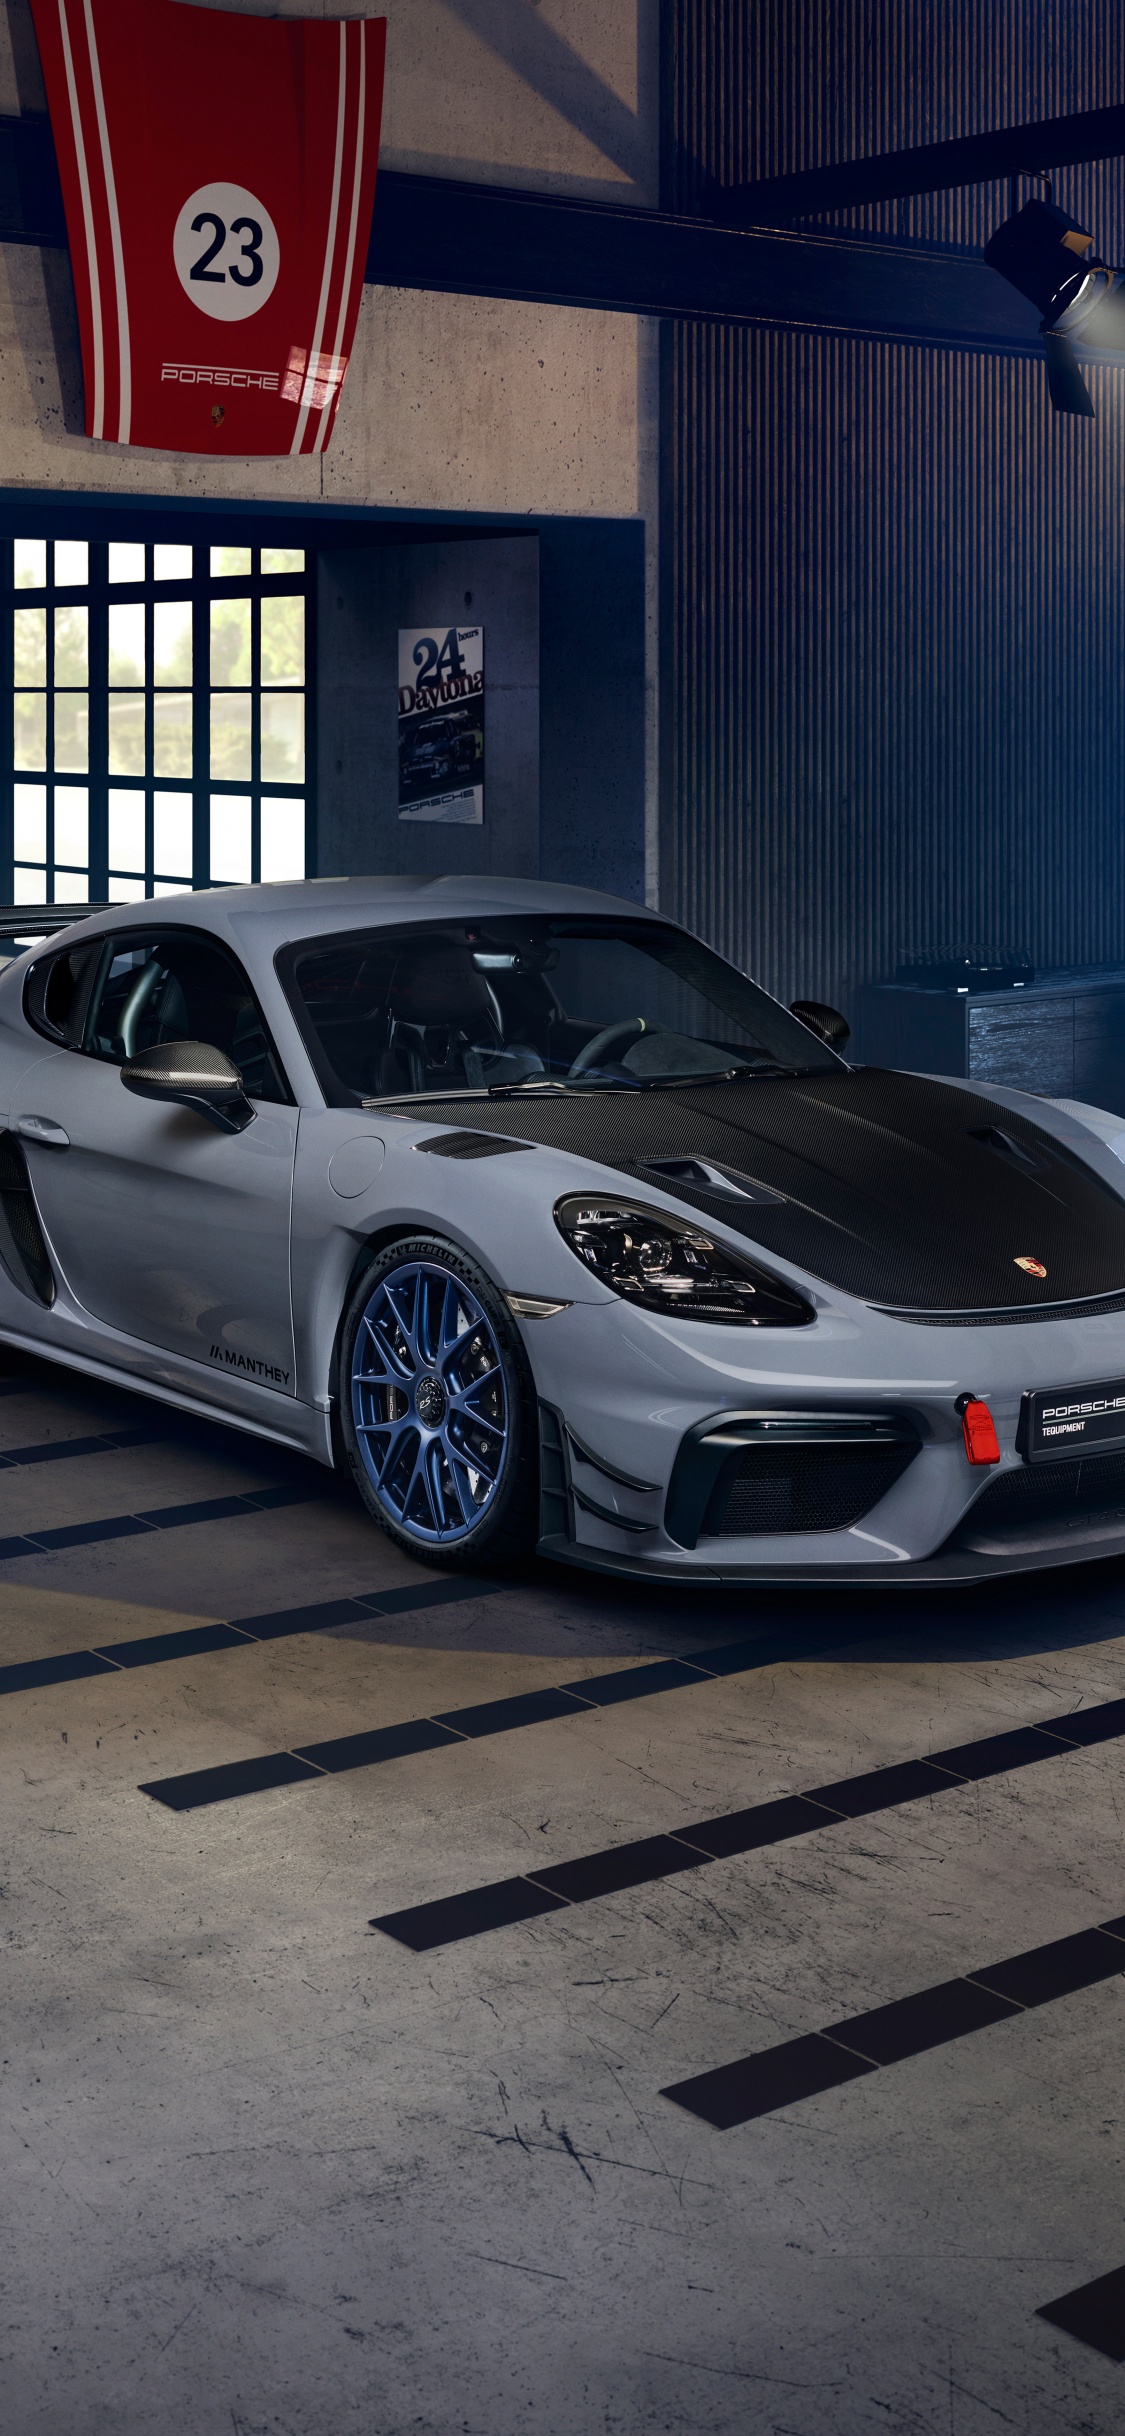 2022 Porsche 718 Cayman GT4 RS First Drive Review: Makes a Hero Out of You